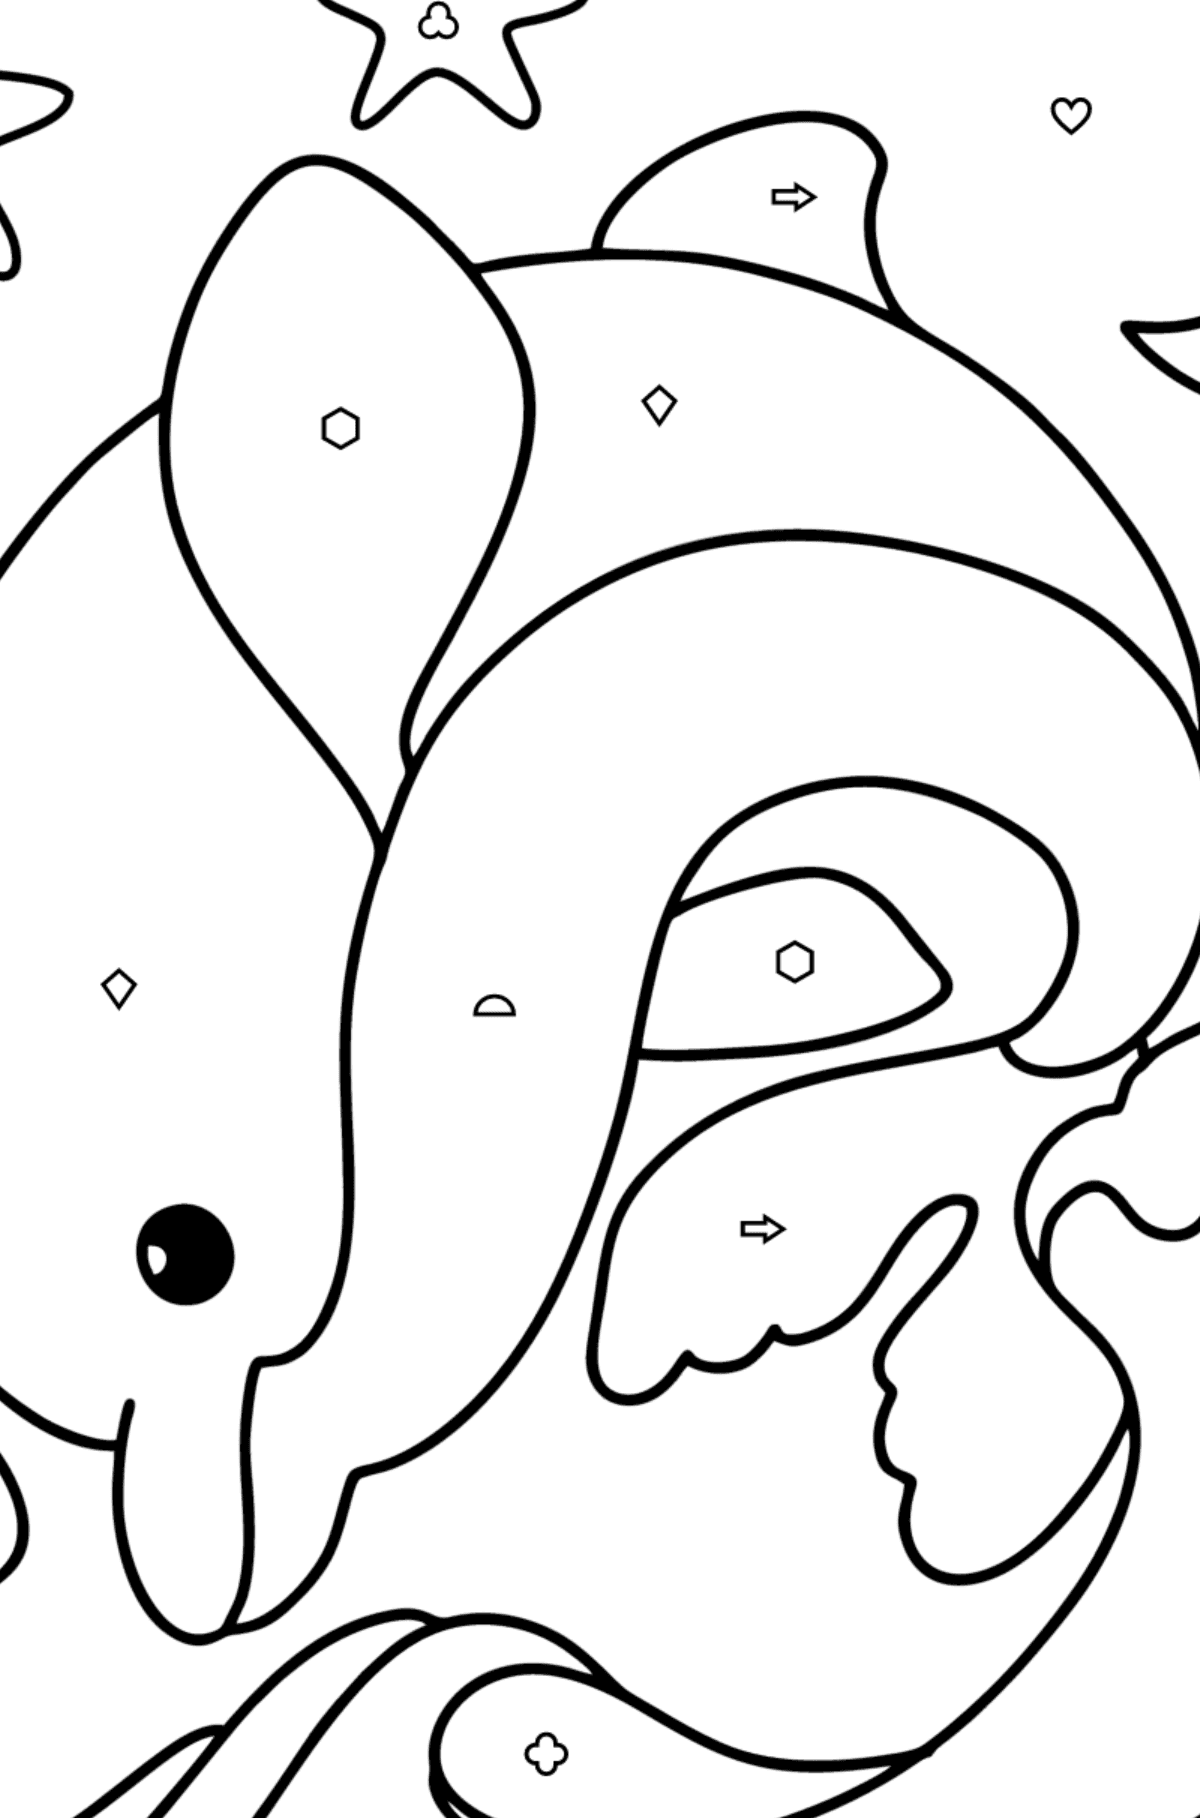 Dolphin in the Sea coloring page - Coloring by Geometric Shapes for Kids